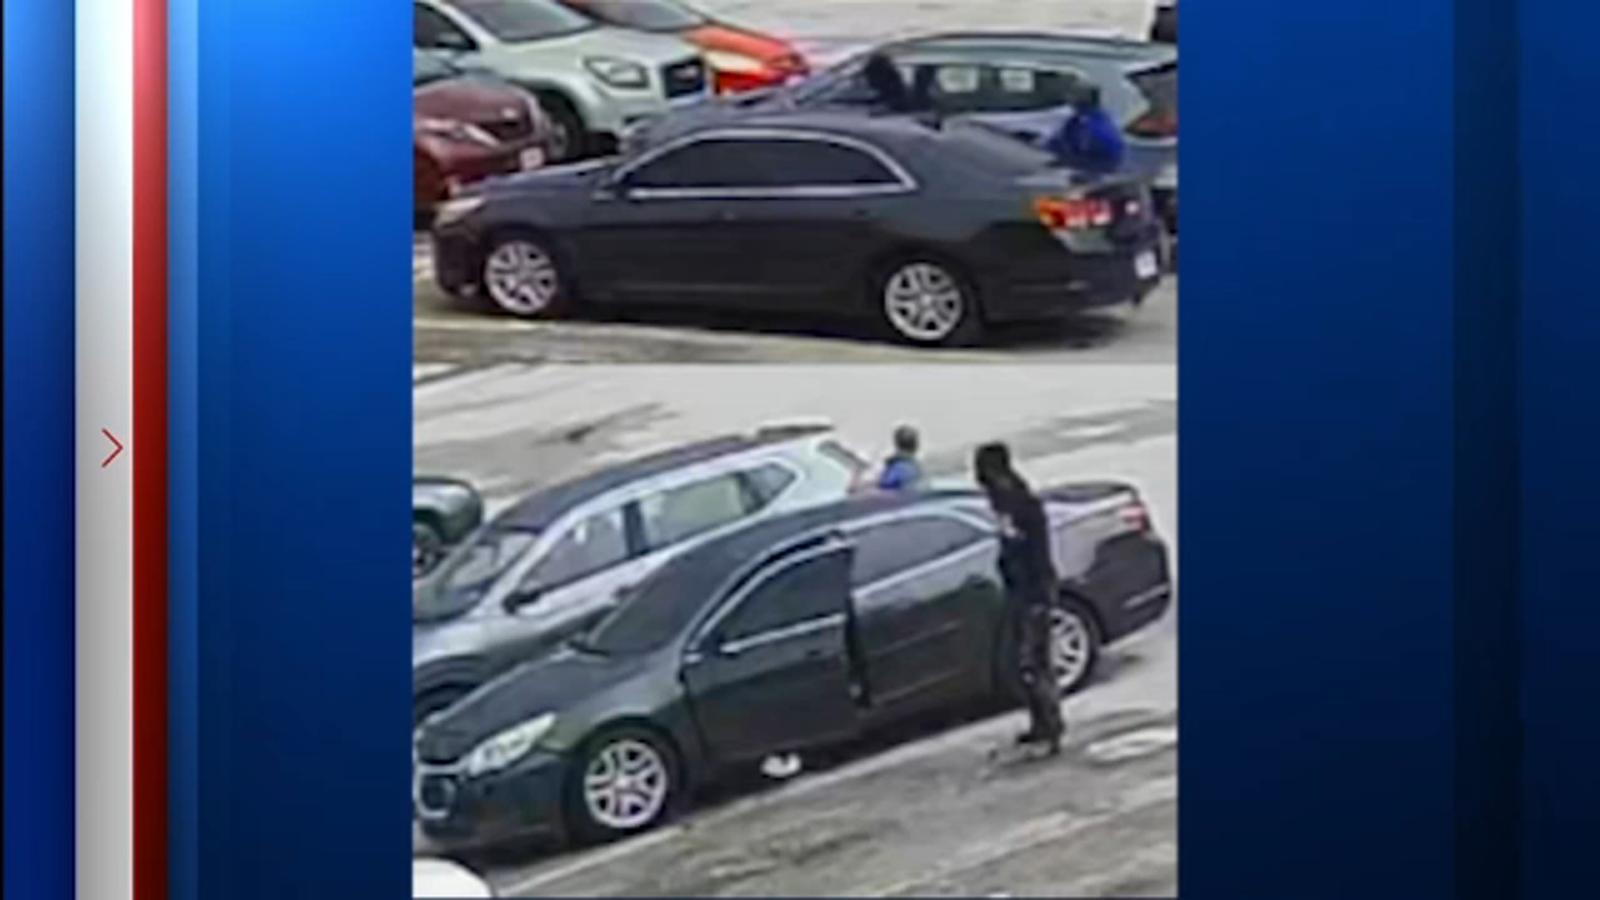 4 suspects wanted in game room robbery where pregnant employee was pistol-whipped, HPD says